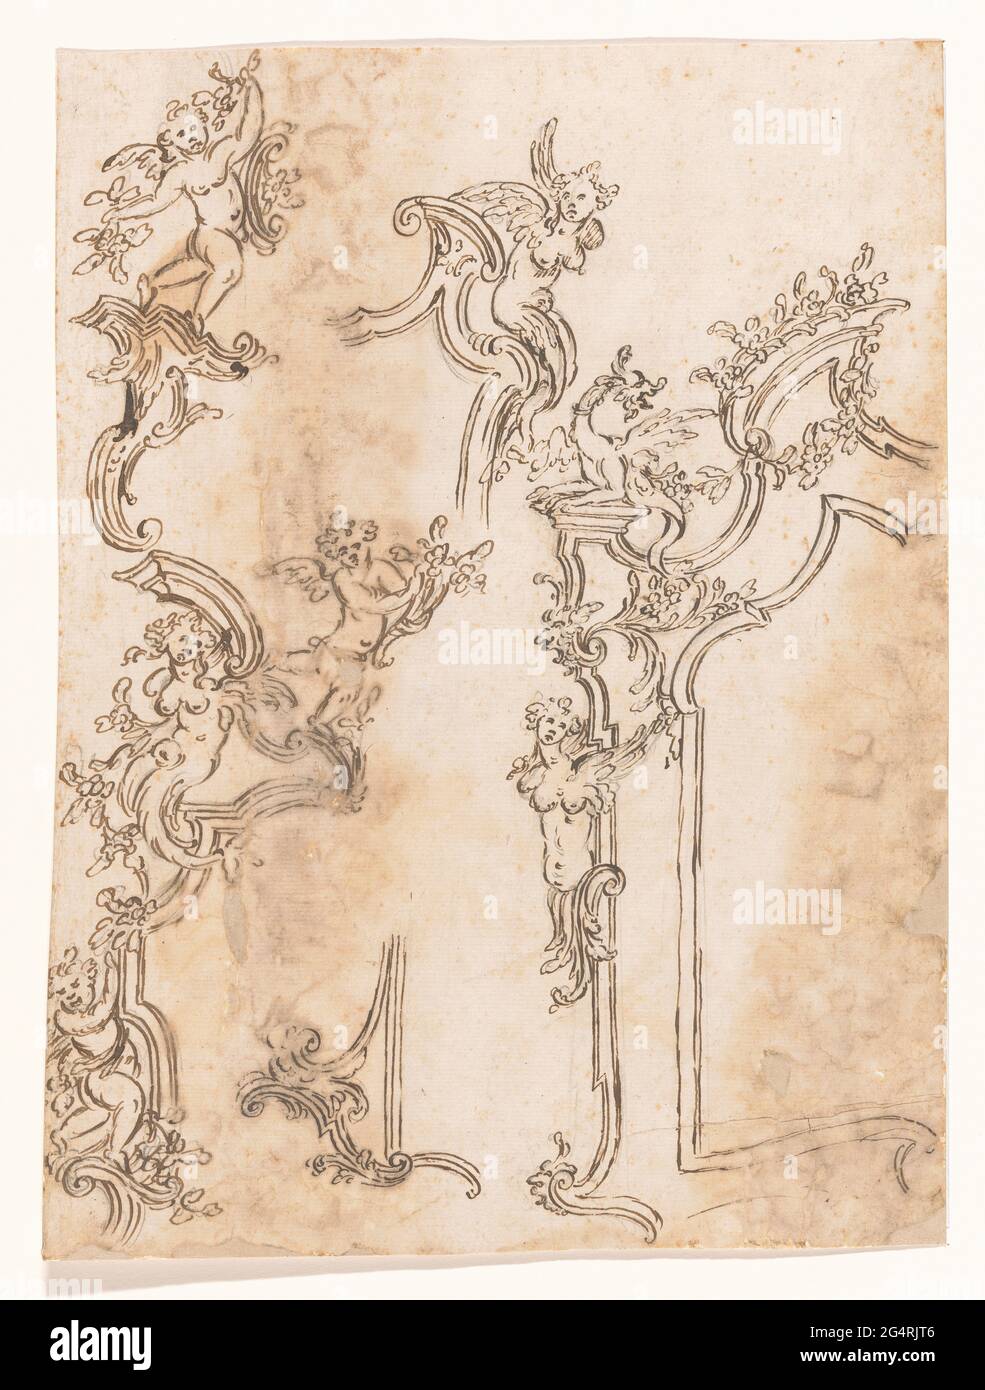 The left half of a mirror list with a winged women's figure and a dragon, left thereof details of mirror lists with winged figures. . Stock Photo